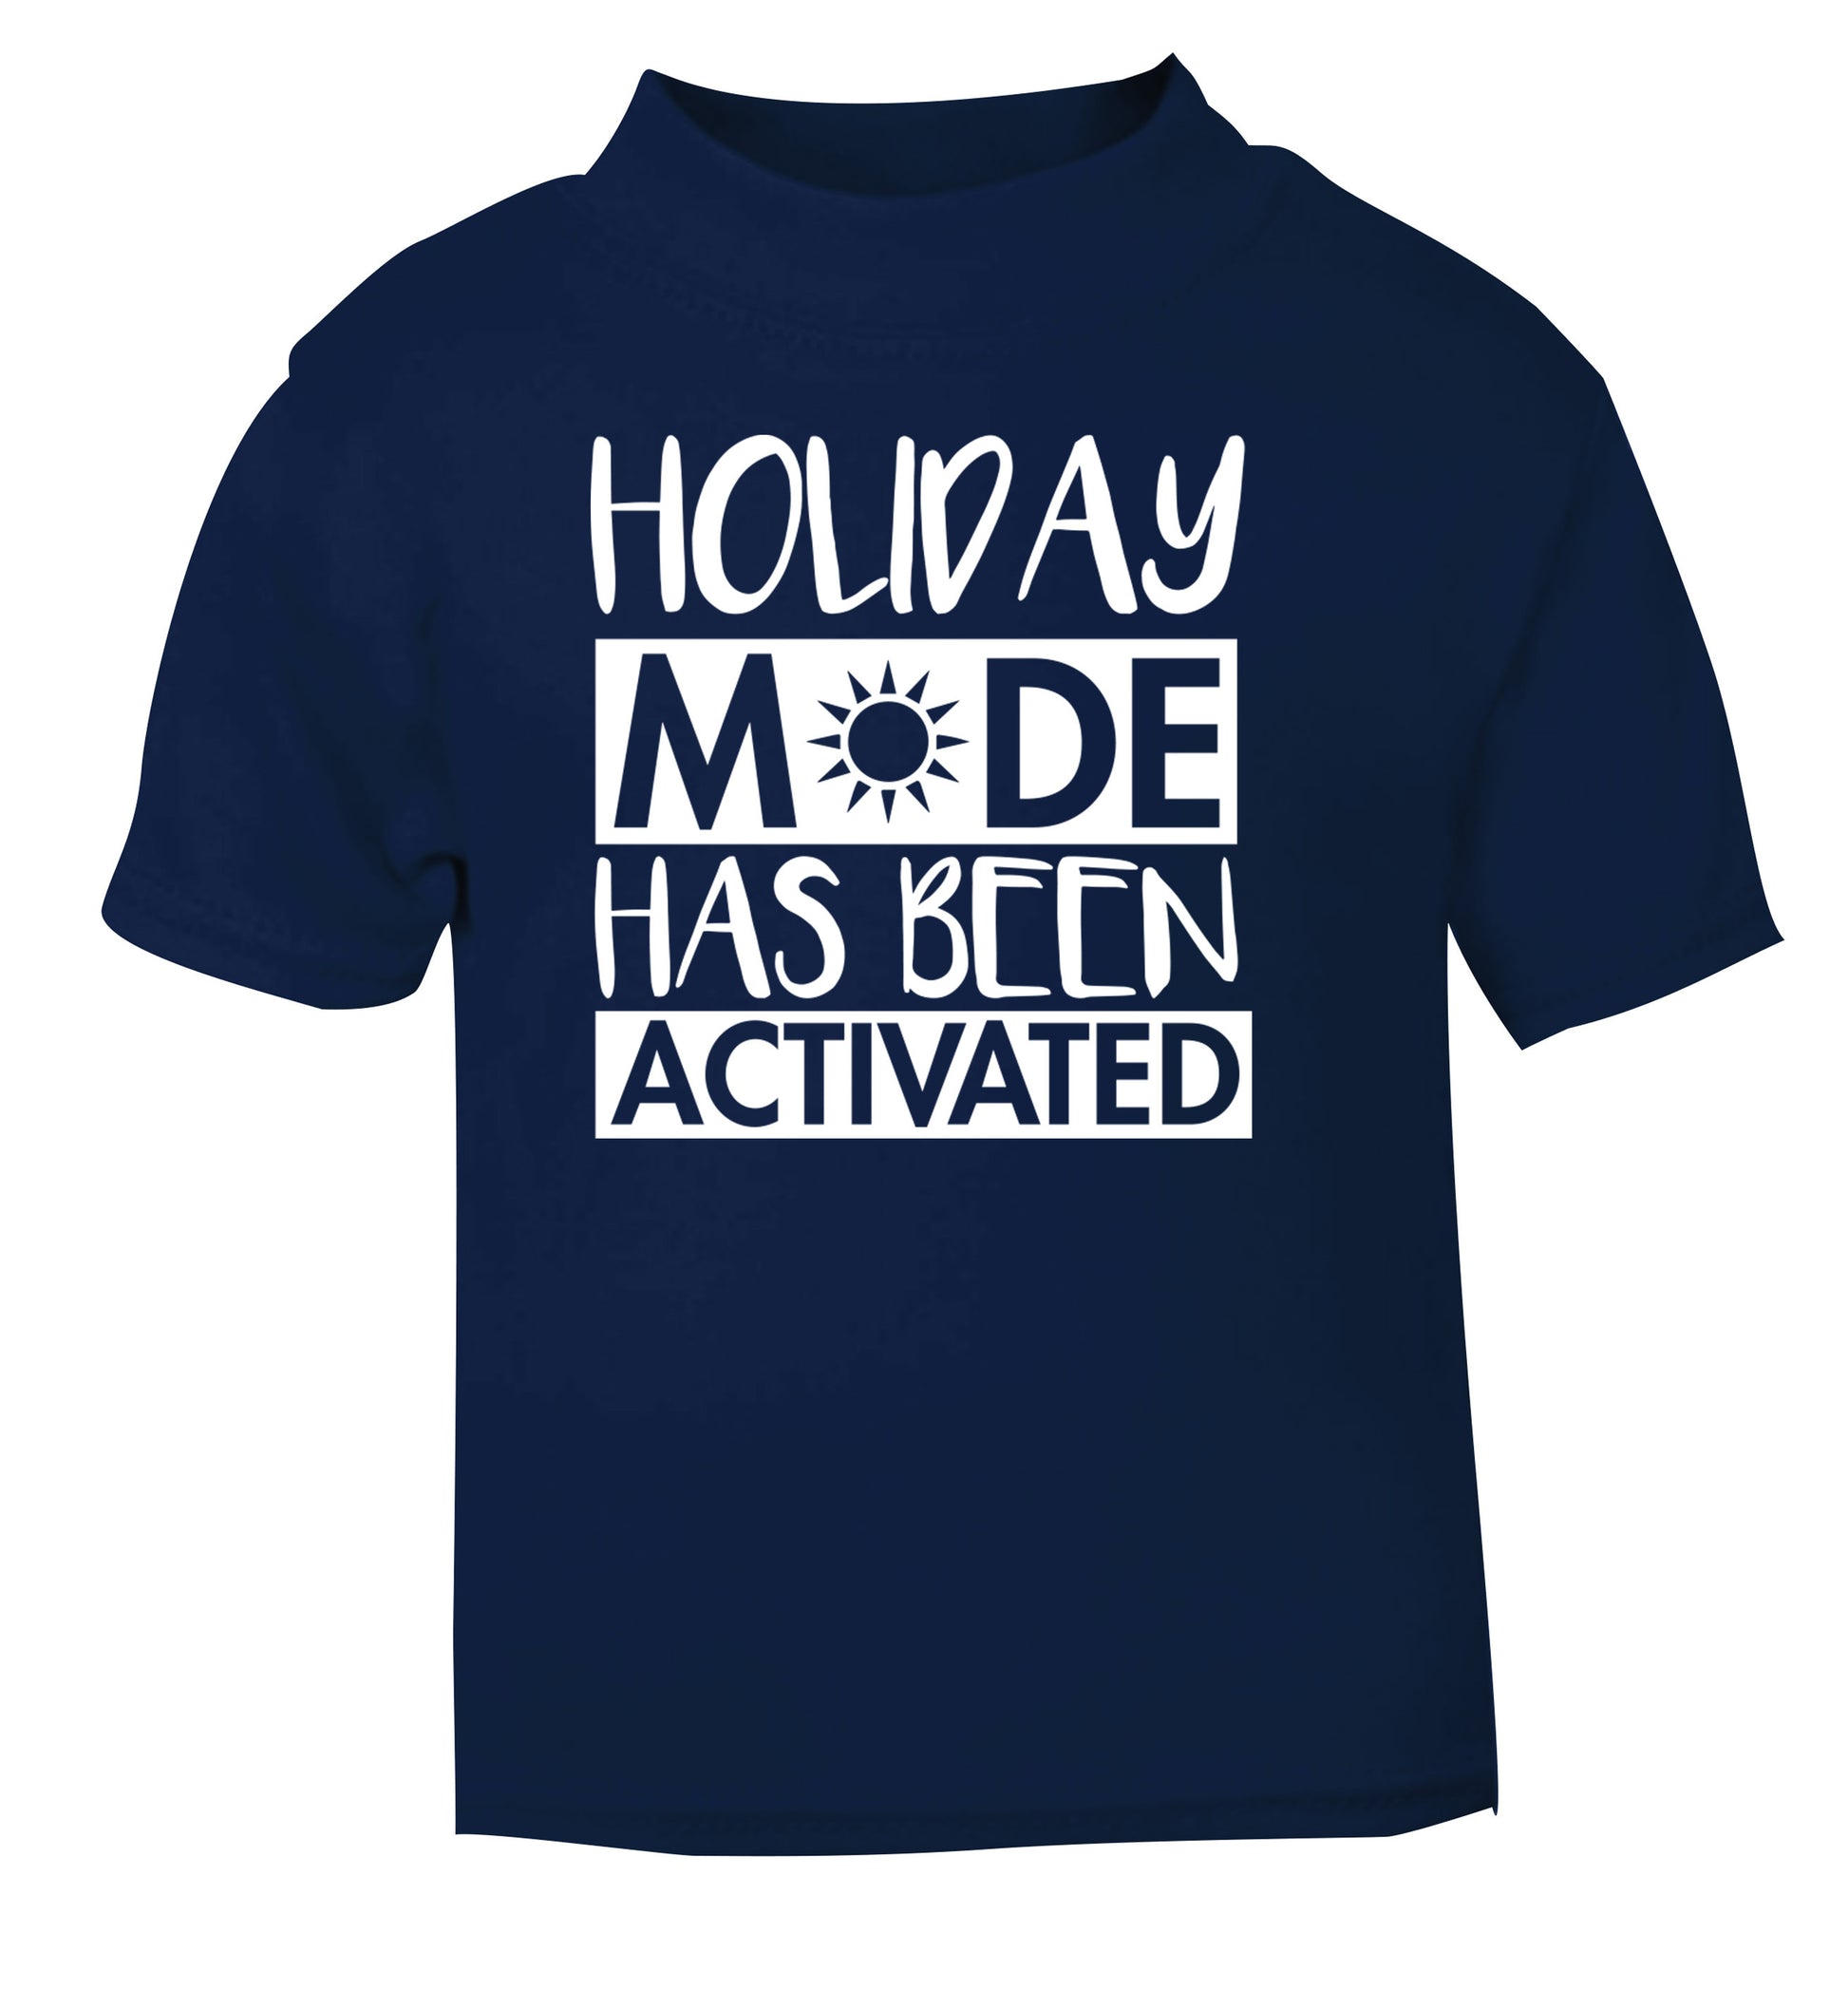 Holiday mode has been activated navy Baby Toddler Tshirt 2 Years